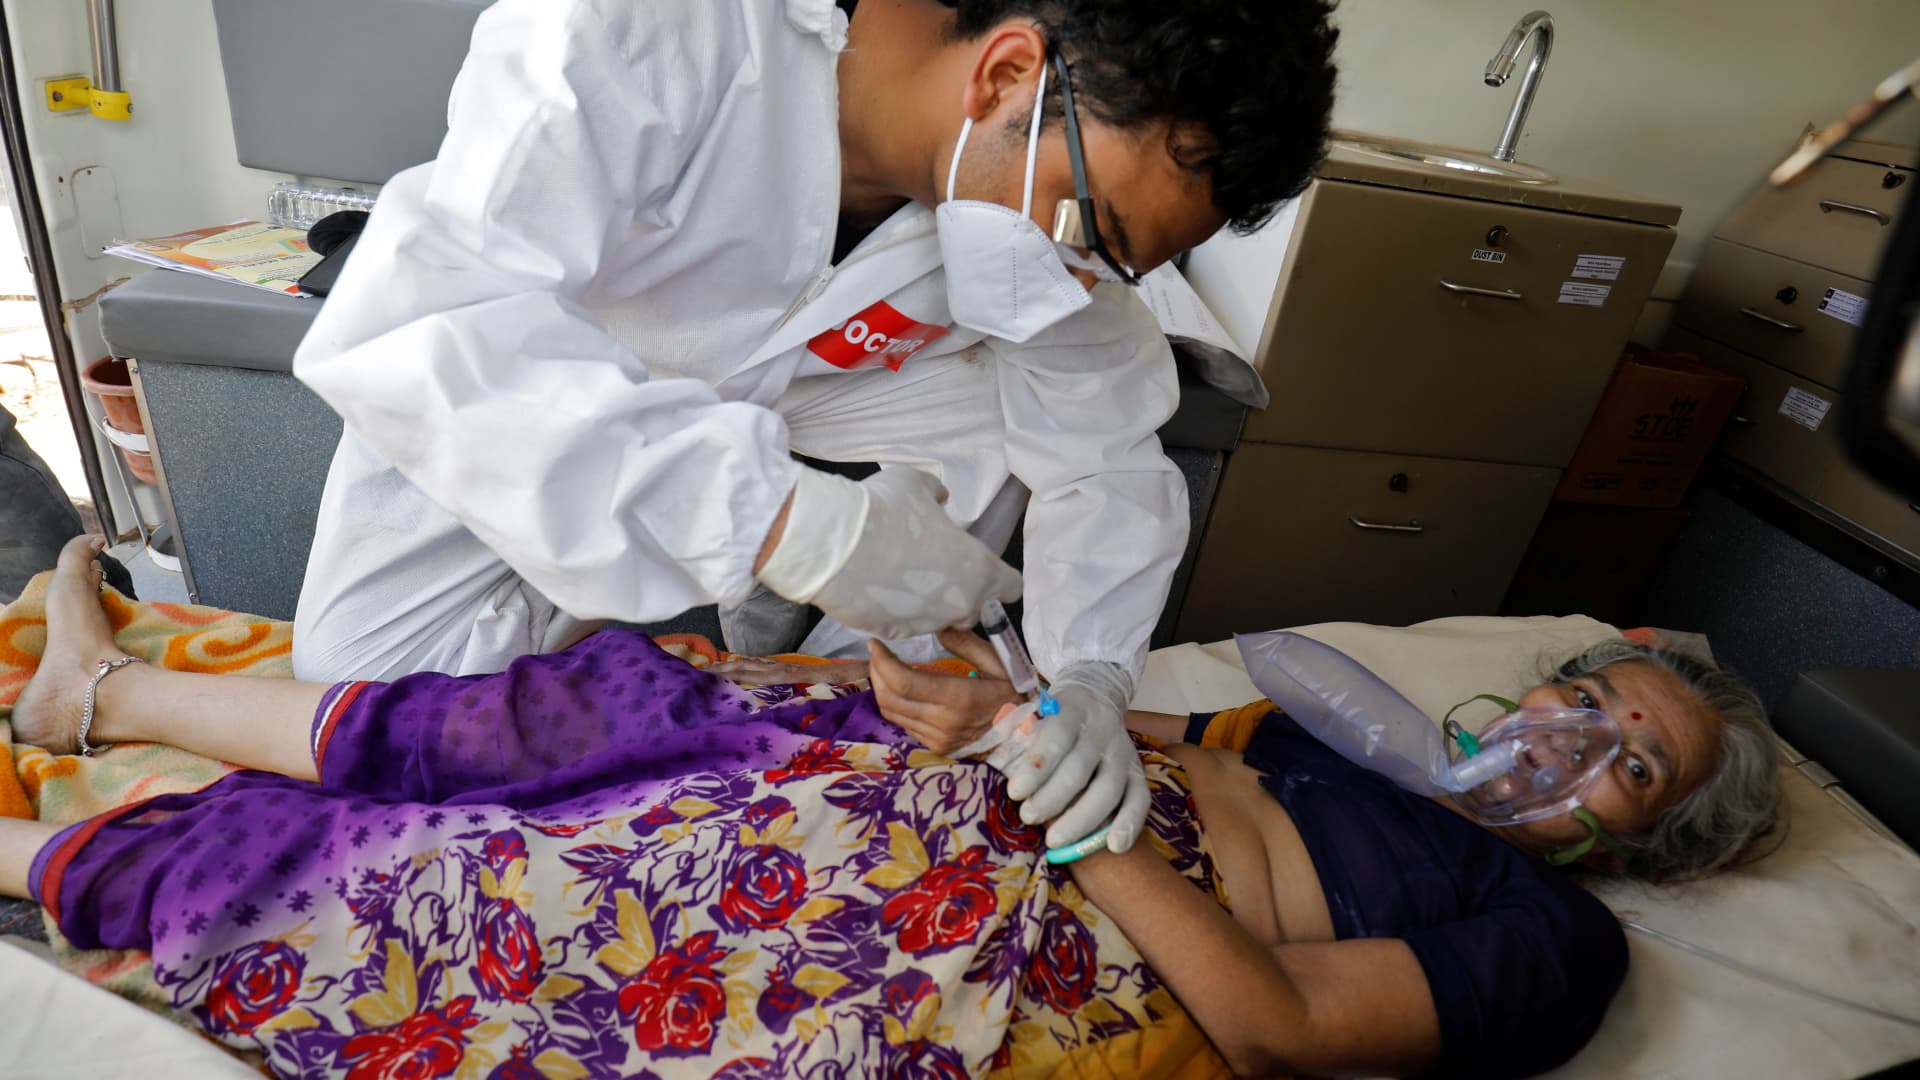 A doctor tends to a patient with a breathing problem inside an ambulance waiting to enter a COVID-19 hospital for treatment, amidst the spread of the coronavirus disease (COVID-19) in Ahmedabad, India, April 25, 2021.